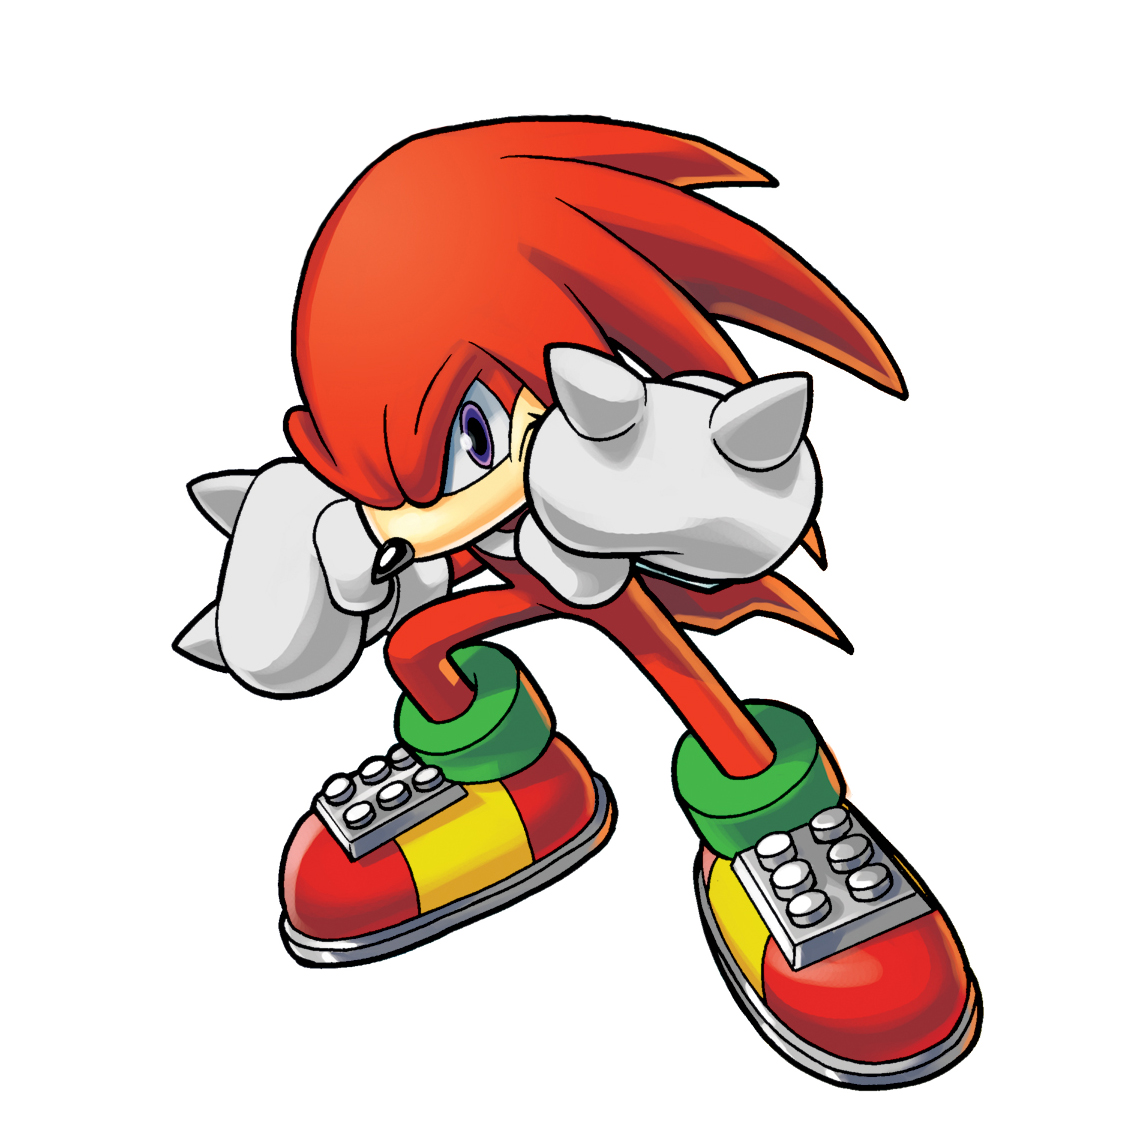 Knuckles (Character) - Comic Vine